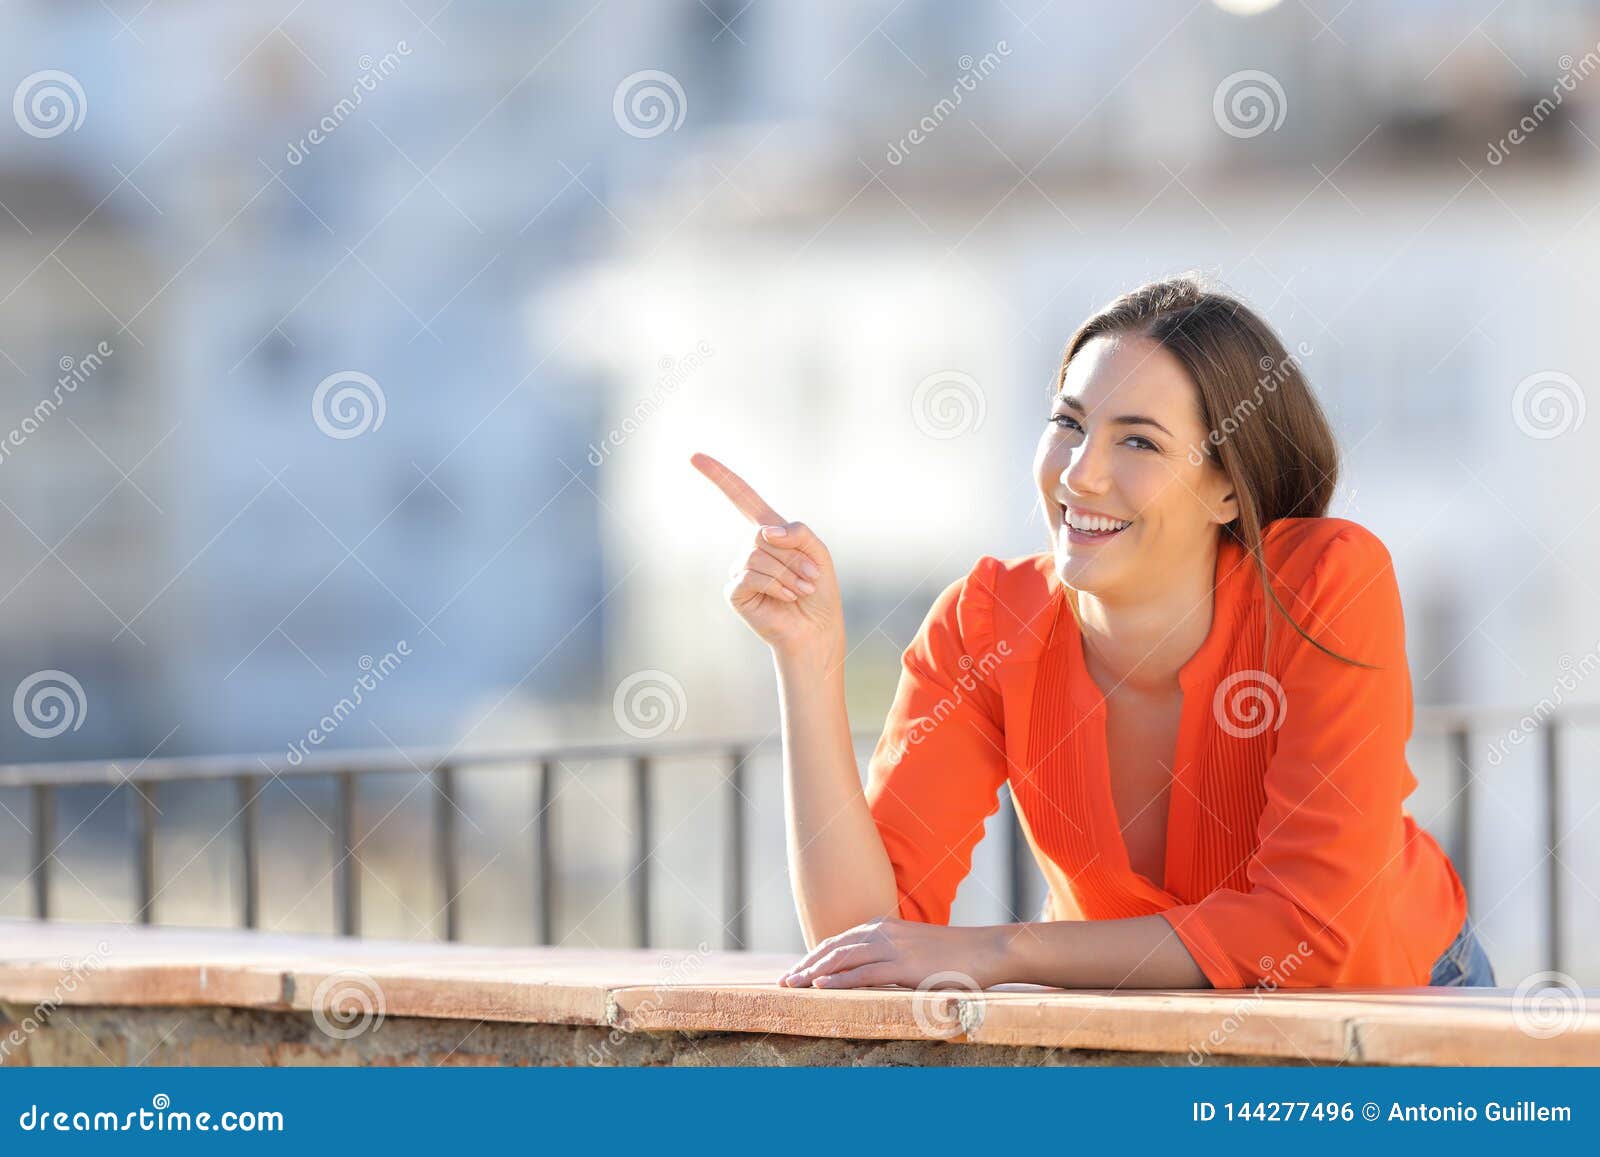 happy woman pointing at side in a town outskirts